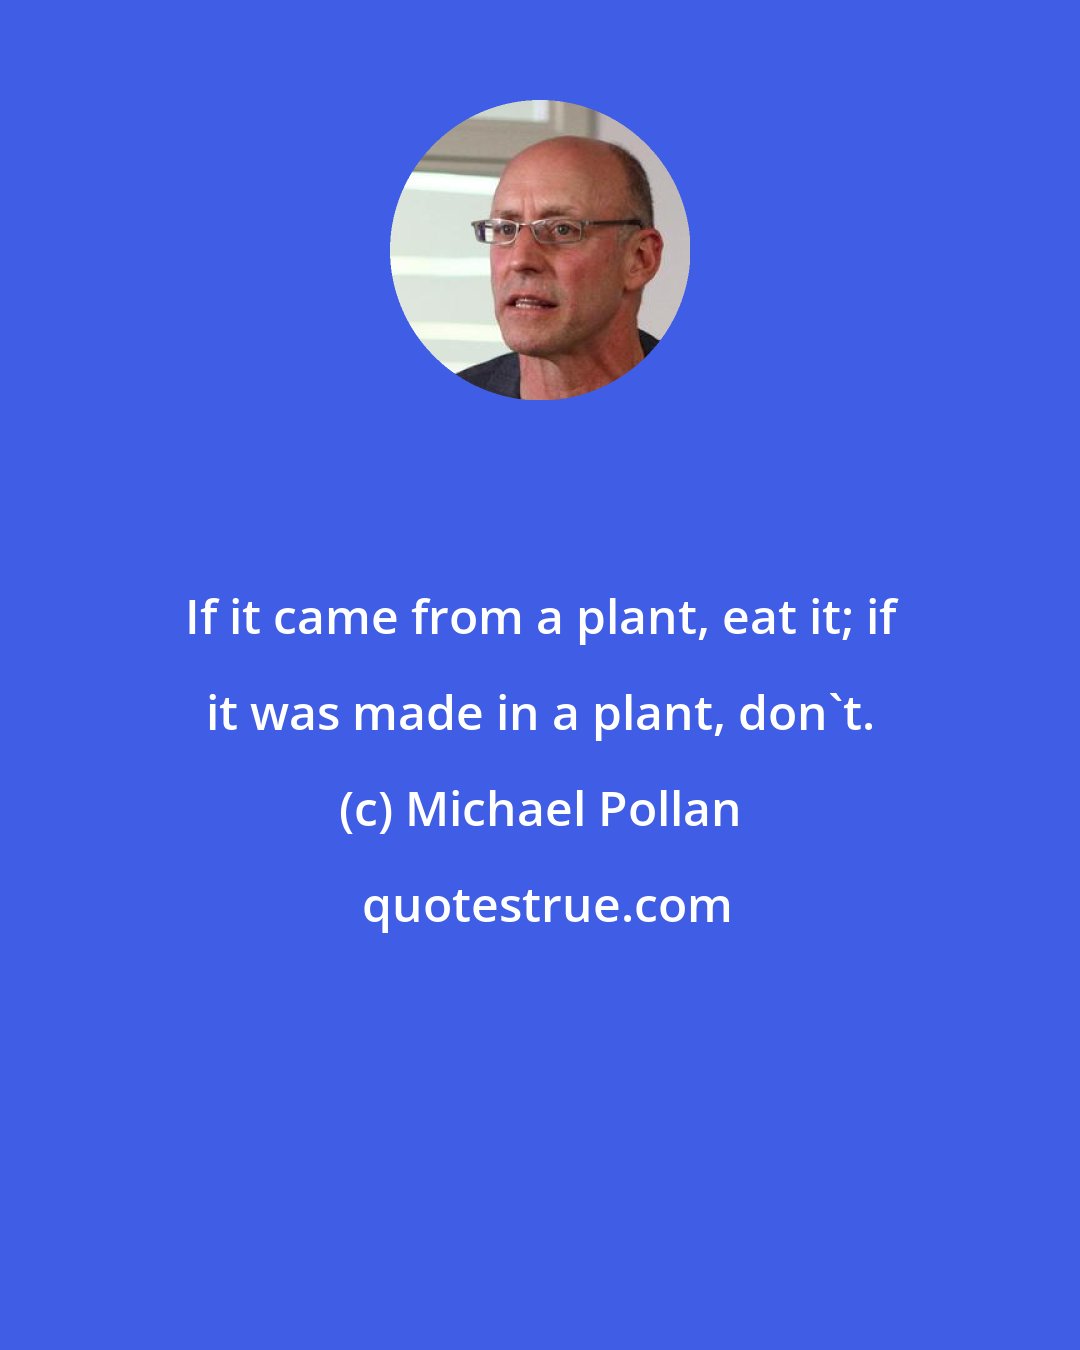 Michael Pollan: If it came from a plant, eat it; if it was made in a plant, don't.